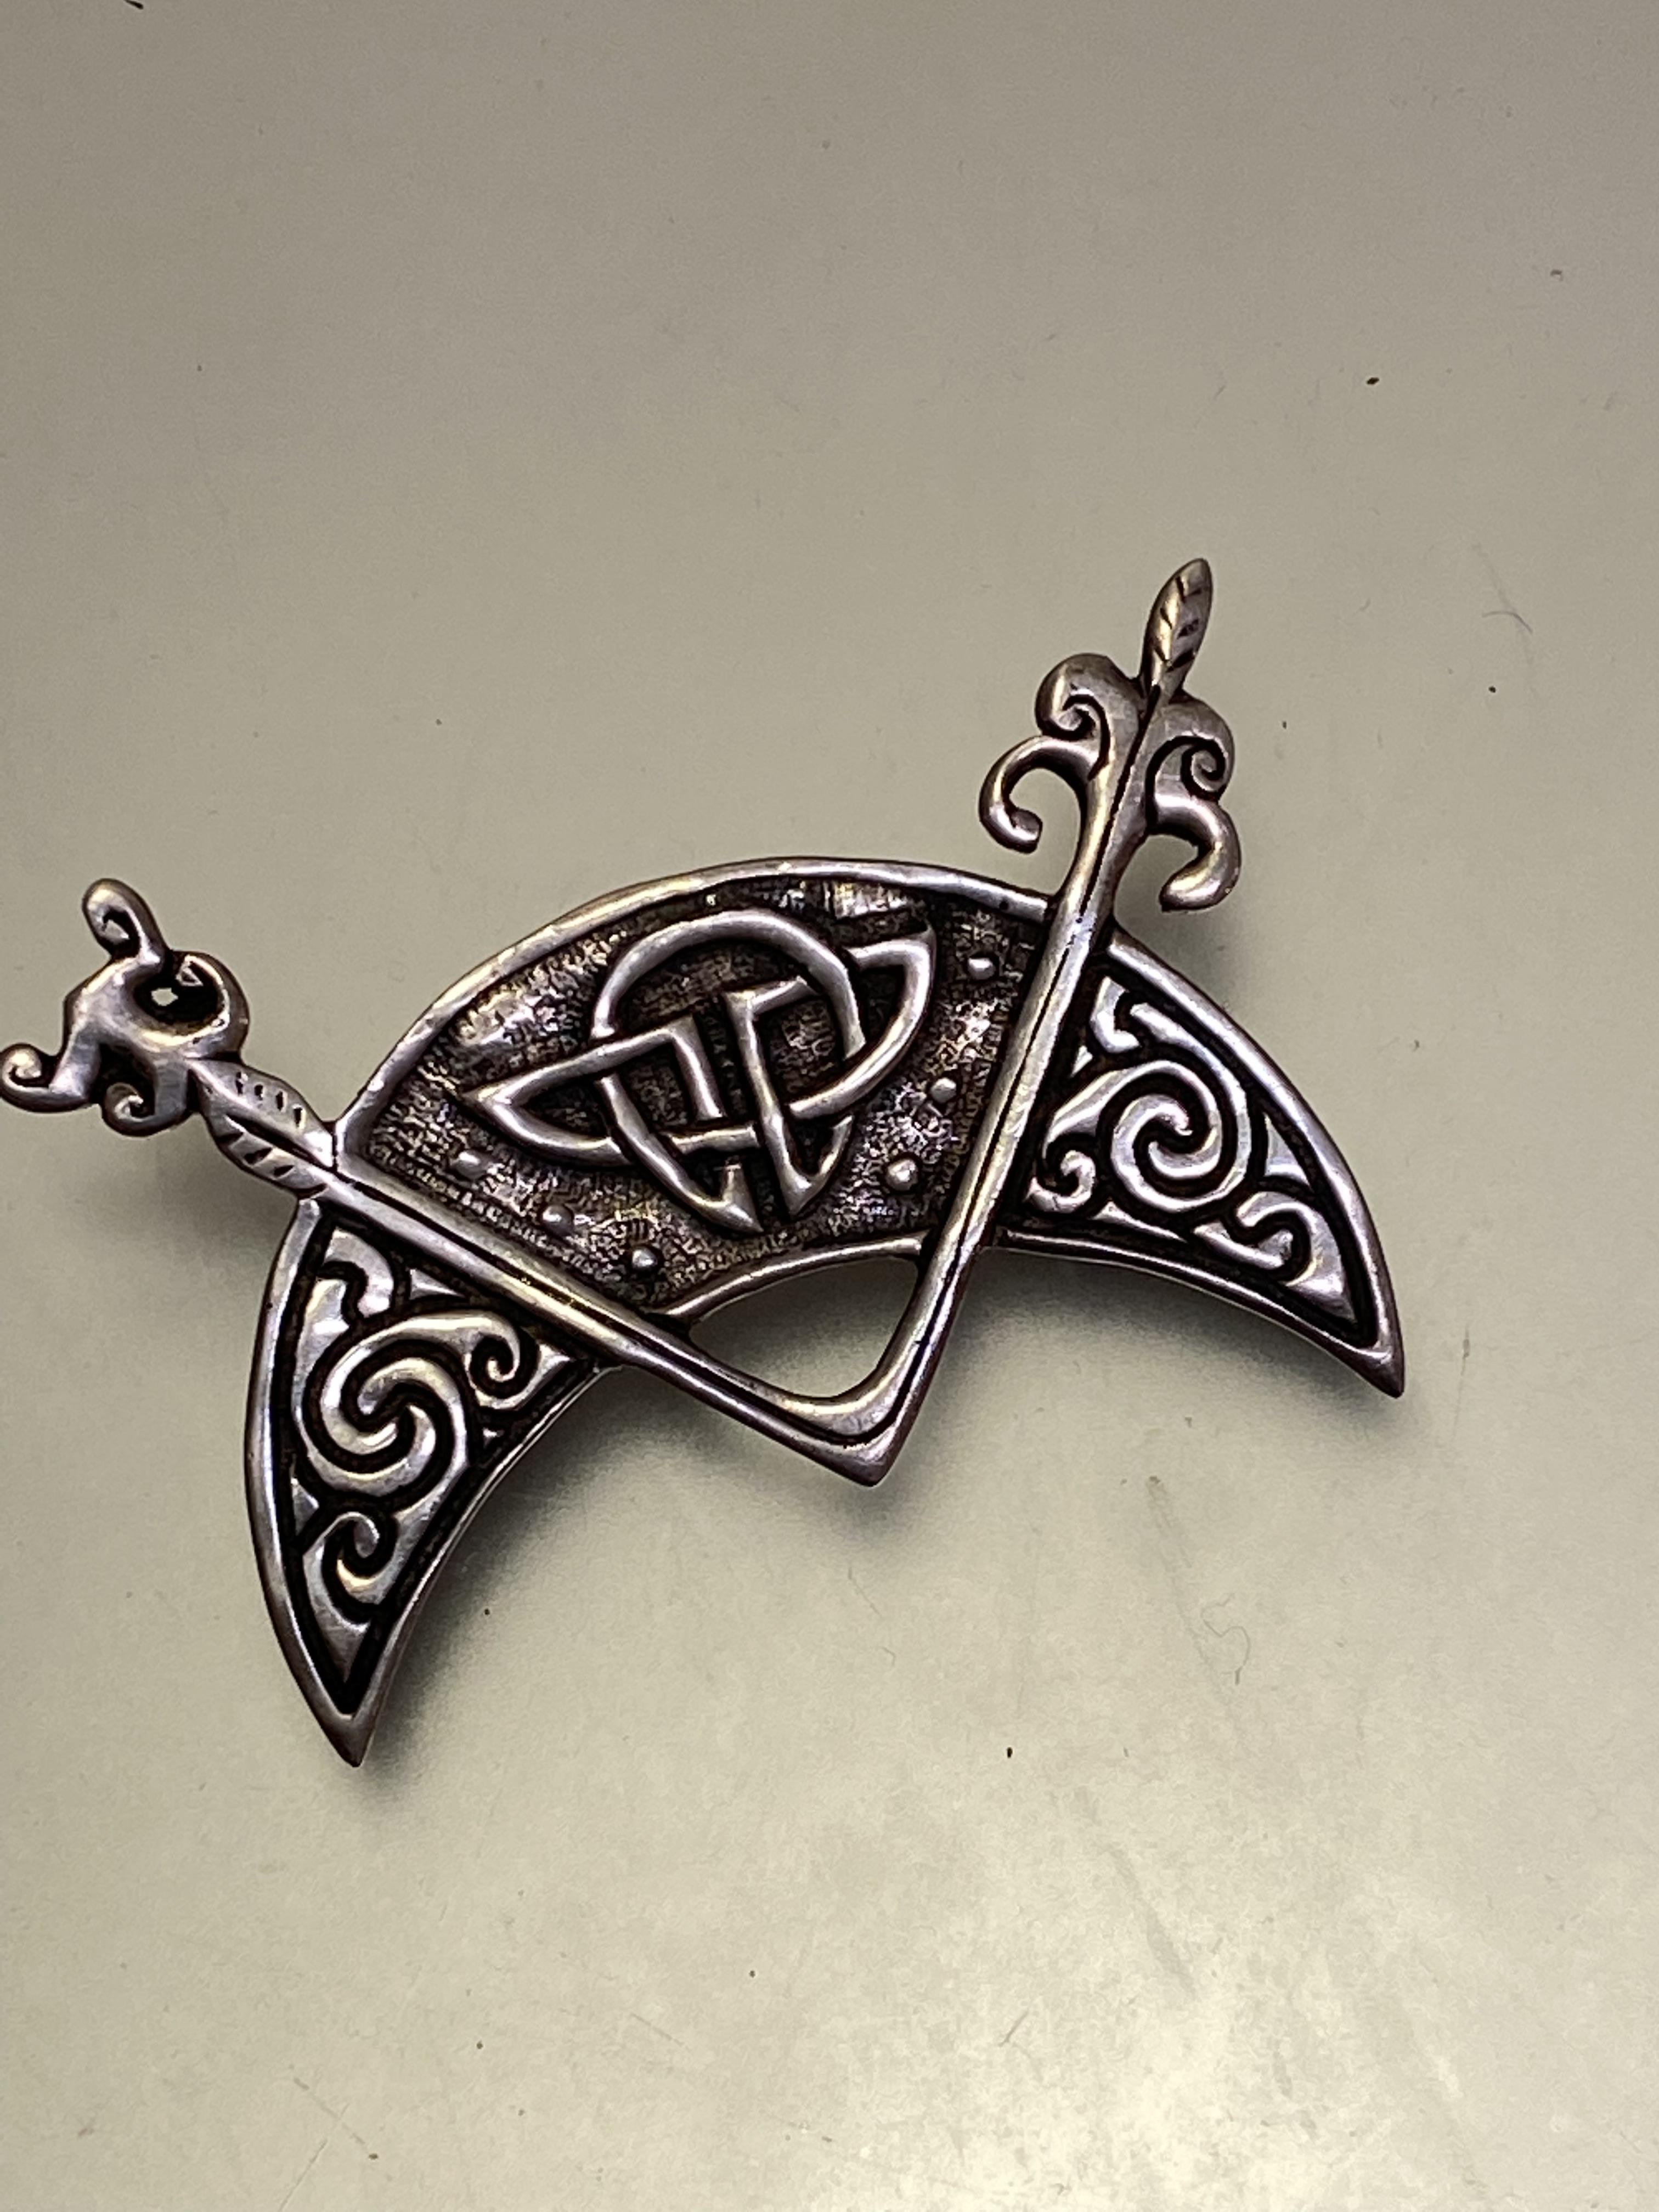 An Iain MacCormack, Iona silver crescent Celtic brooch, stamped verso INC Iona, (6cm x 4cm)